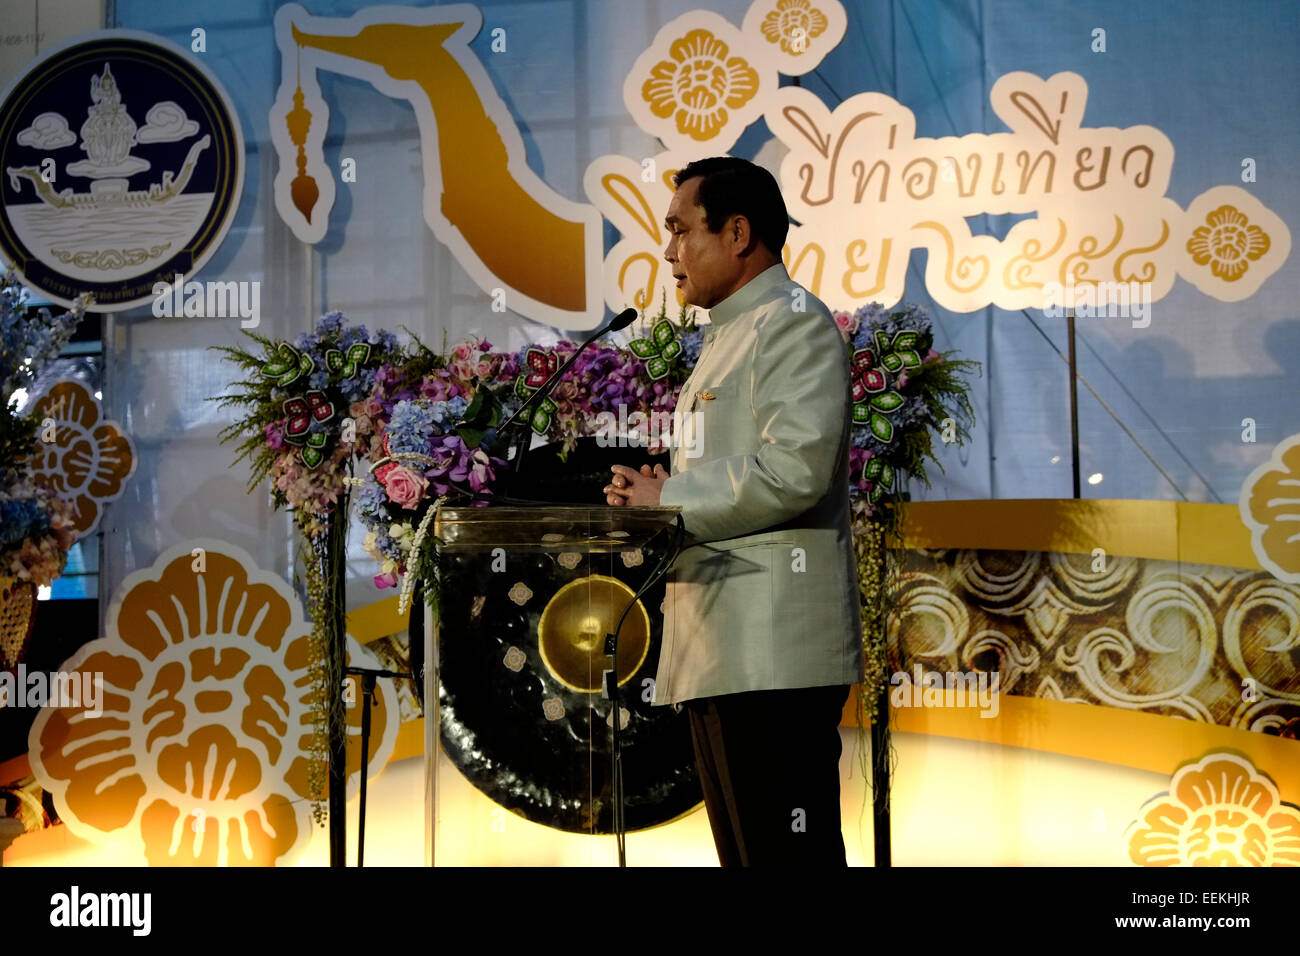 Thai Prime Minister Prayut Chan o cha speaking at the opening ceremony of the parade for the Thailand Tourism Festival (TTF) to promote Thailand tourism in front of Siam Discovery shopping center in Bangkok Thailand Stock Photo